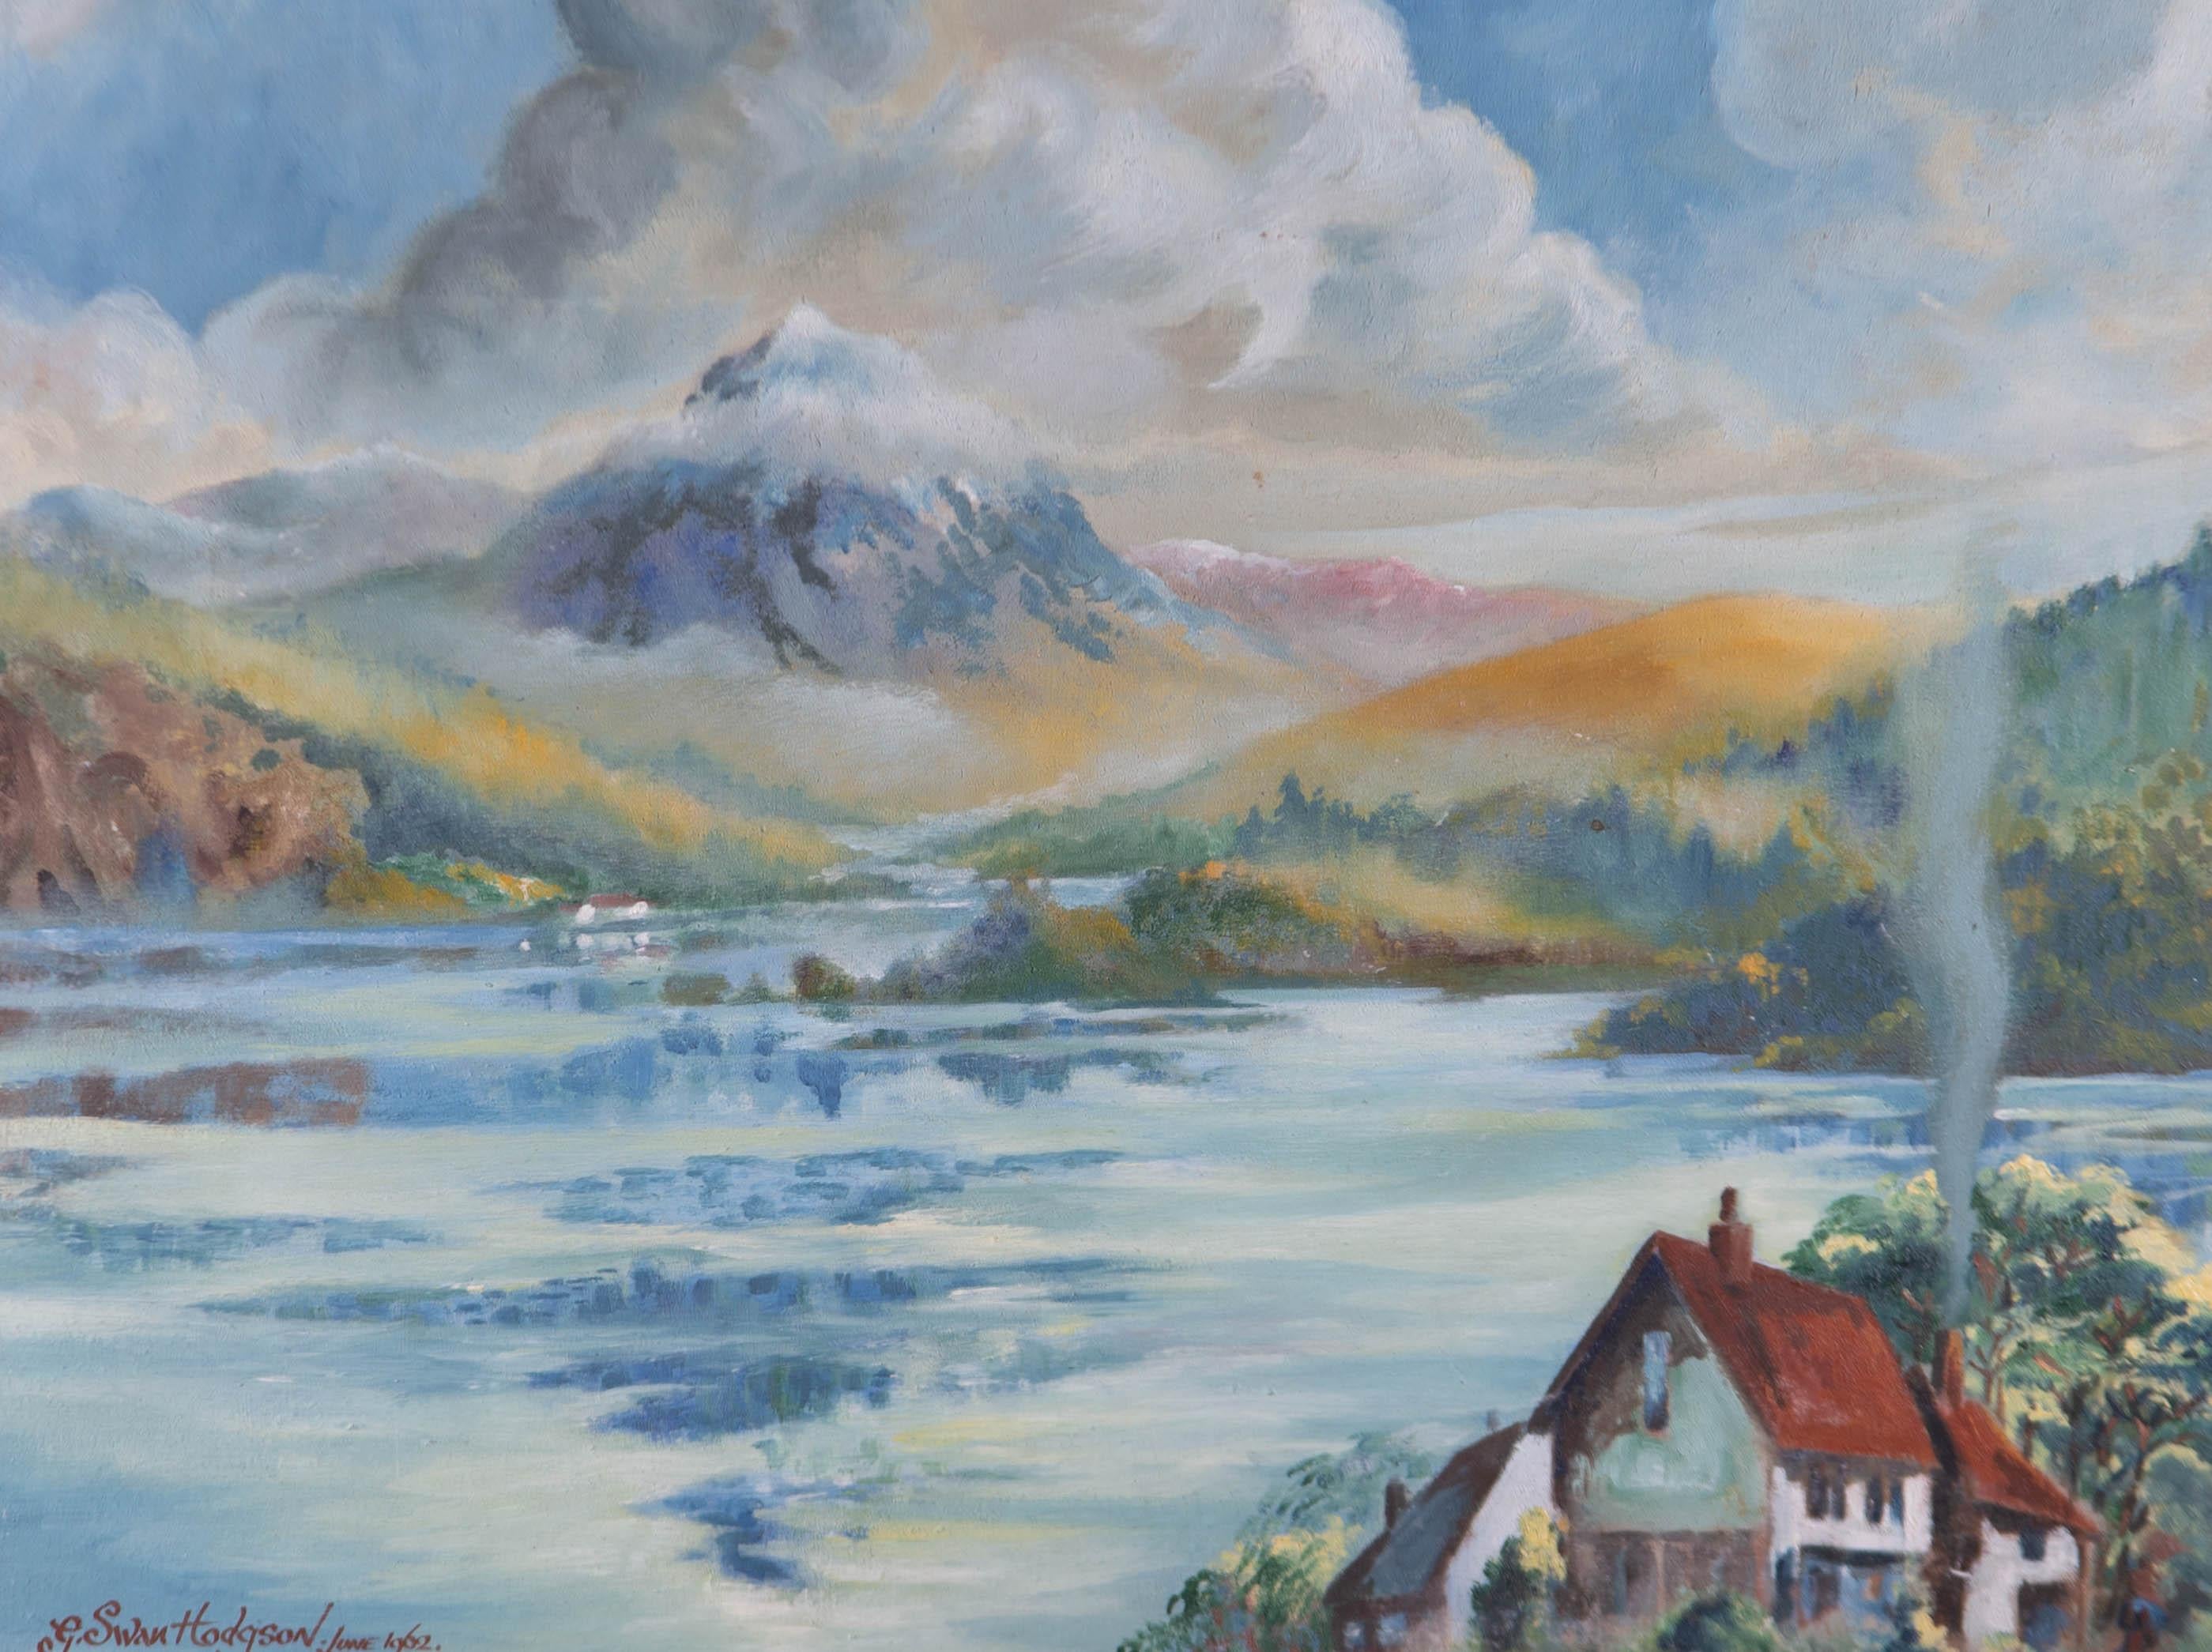 G. Swan Hodgson - 1962 Oil, Lake Scene with Cottage - Painting by Unknown